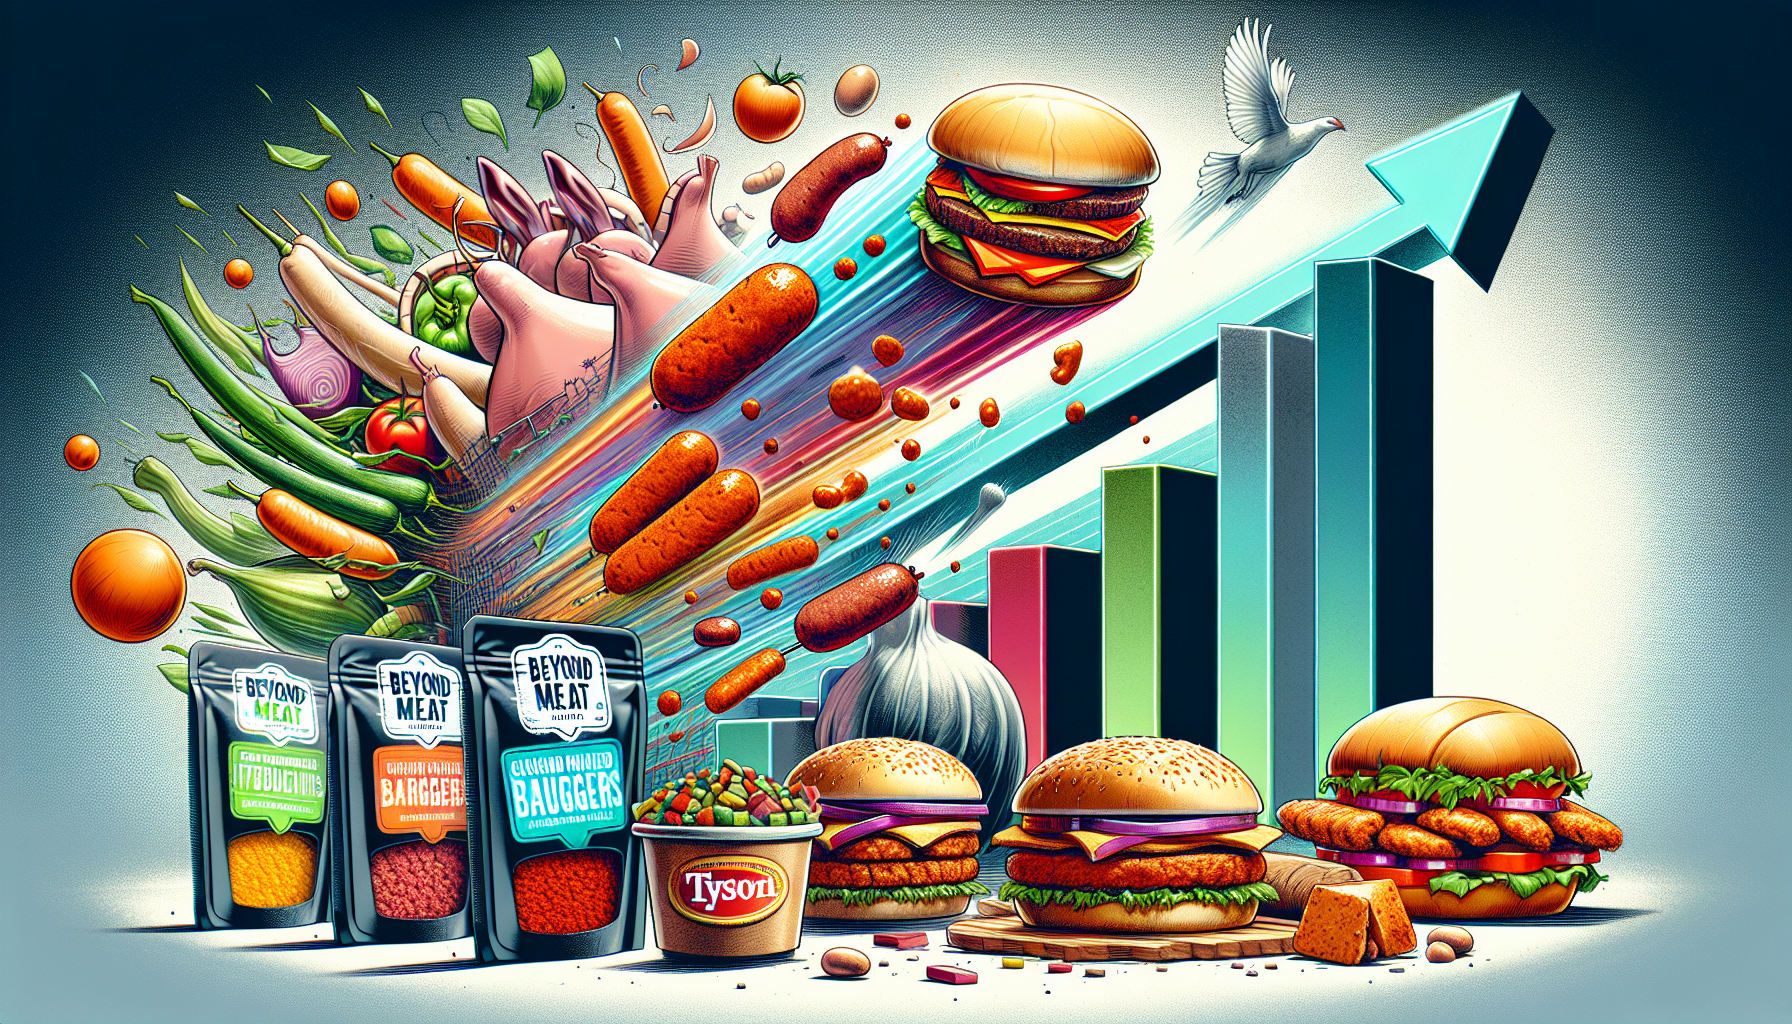 Illustration of Beyond Meat and Tyson Foods products